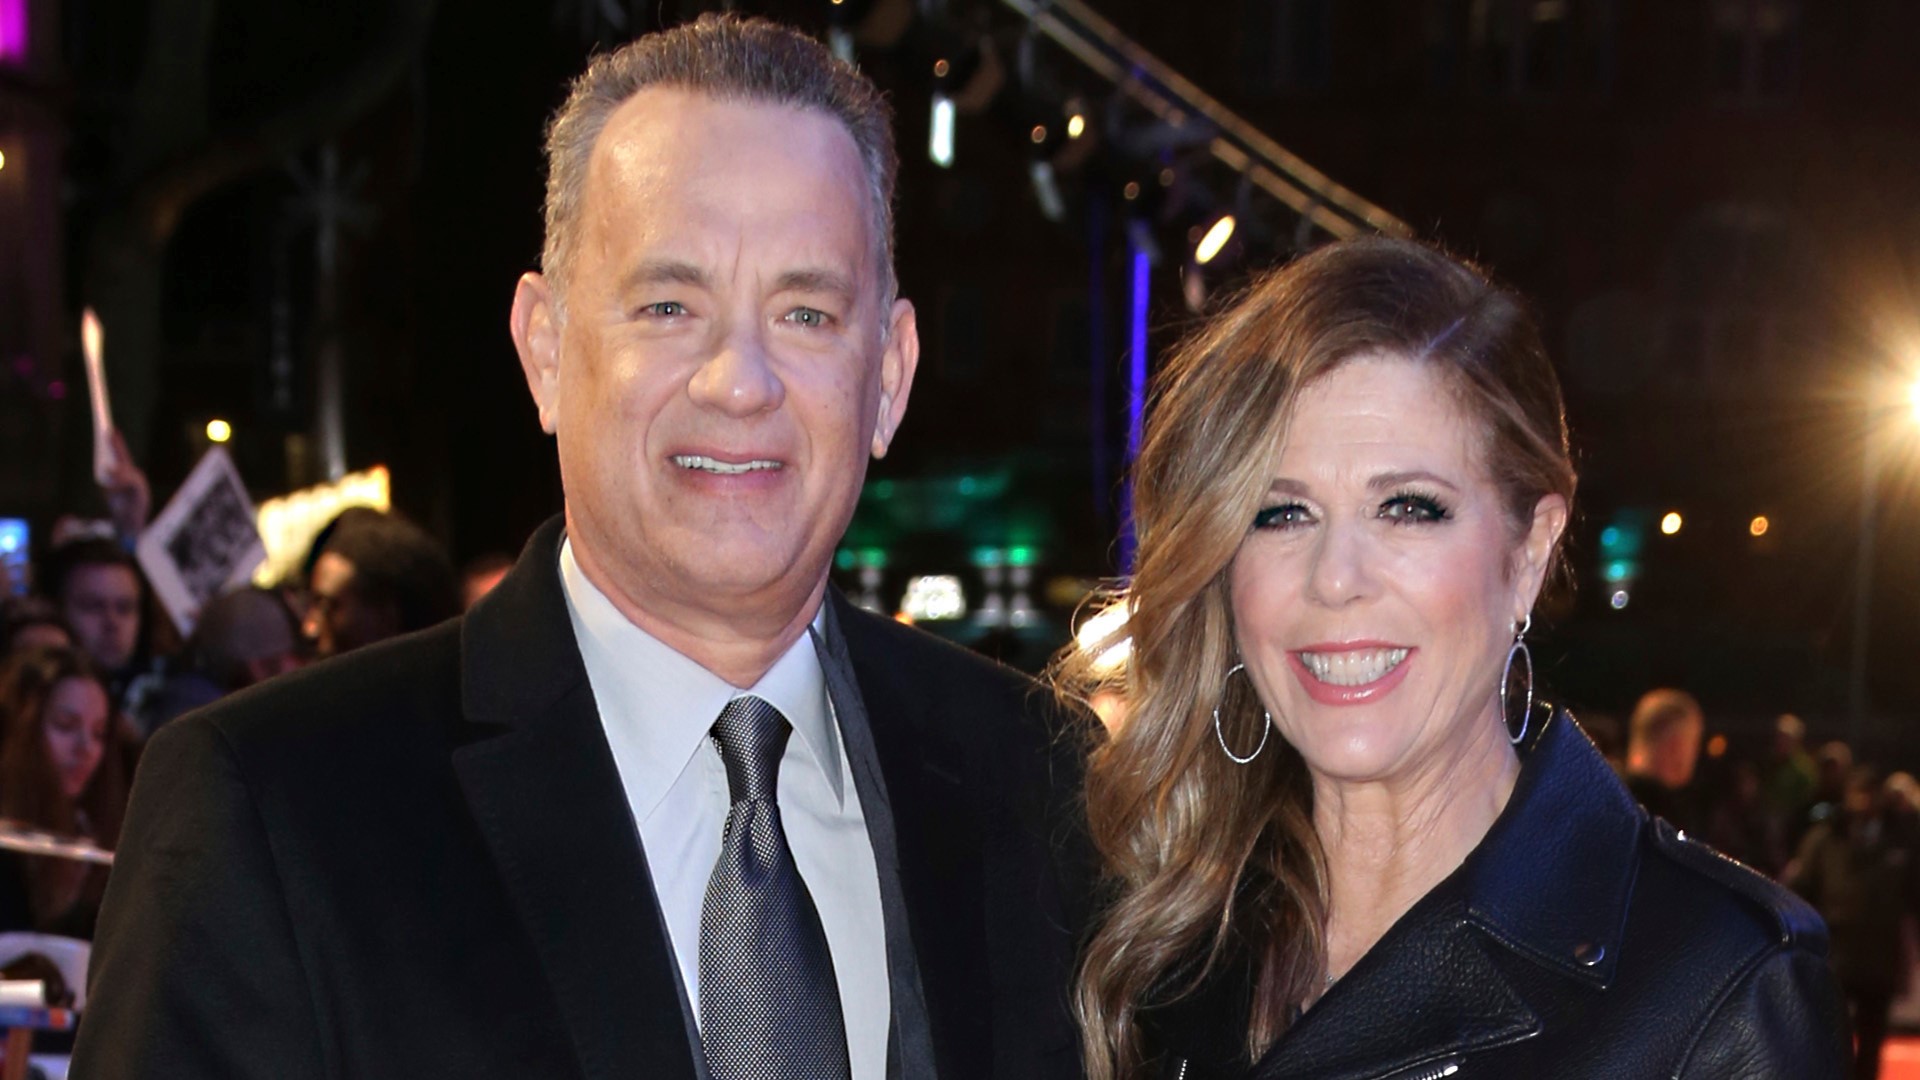 Legendary actor Tom Hanks and his wife, Rita Hanks, announced on social media Wednesday they tested positive to coronavirus while filming a movie in Australia.